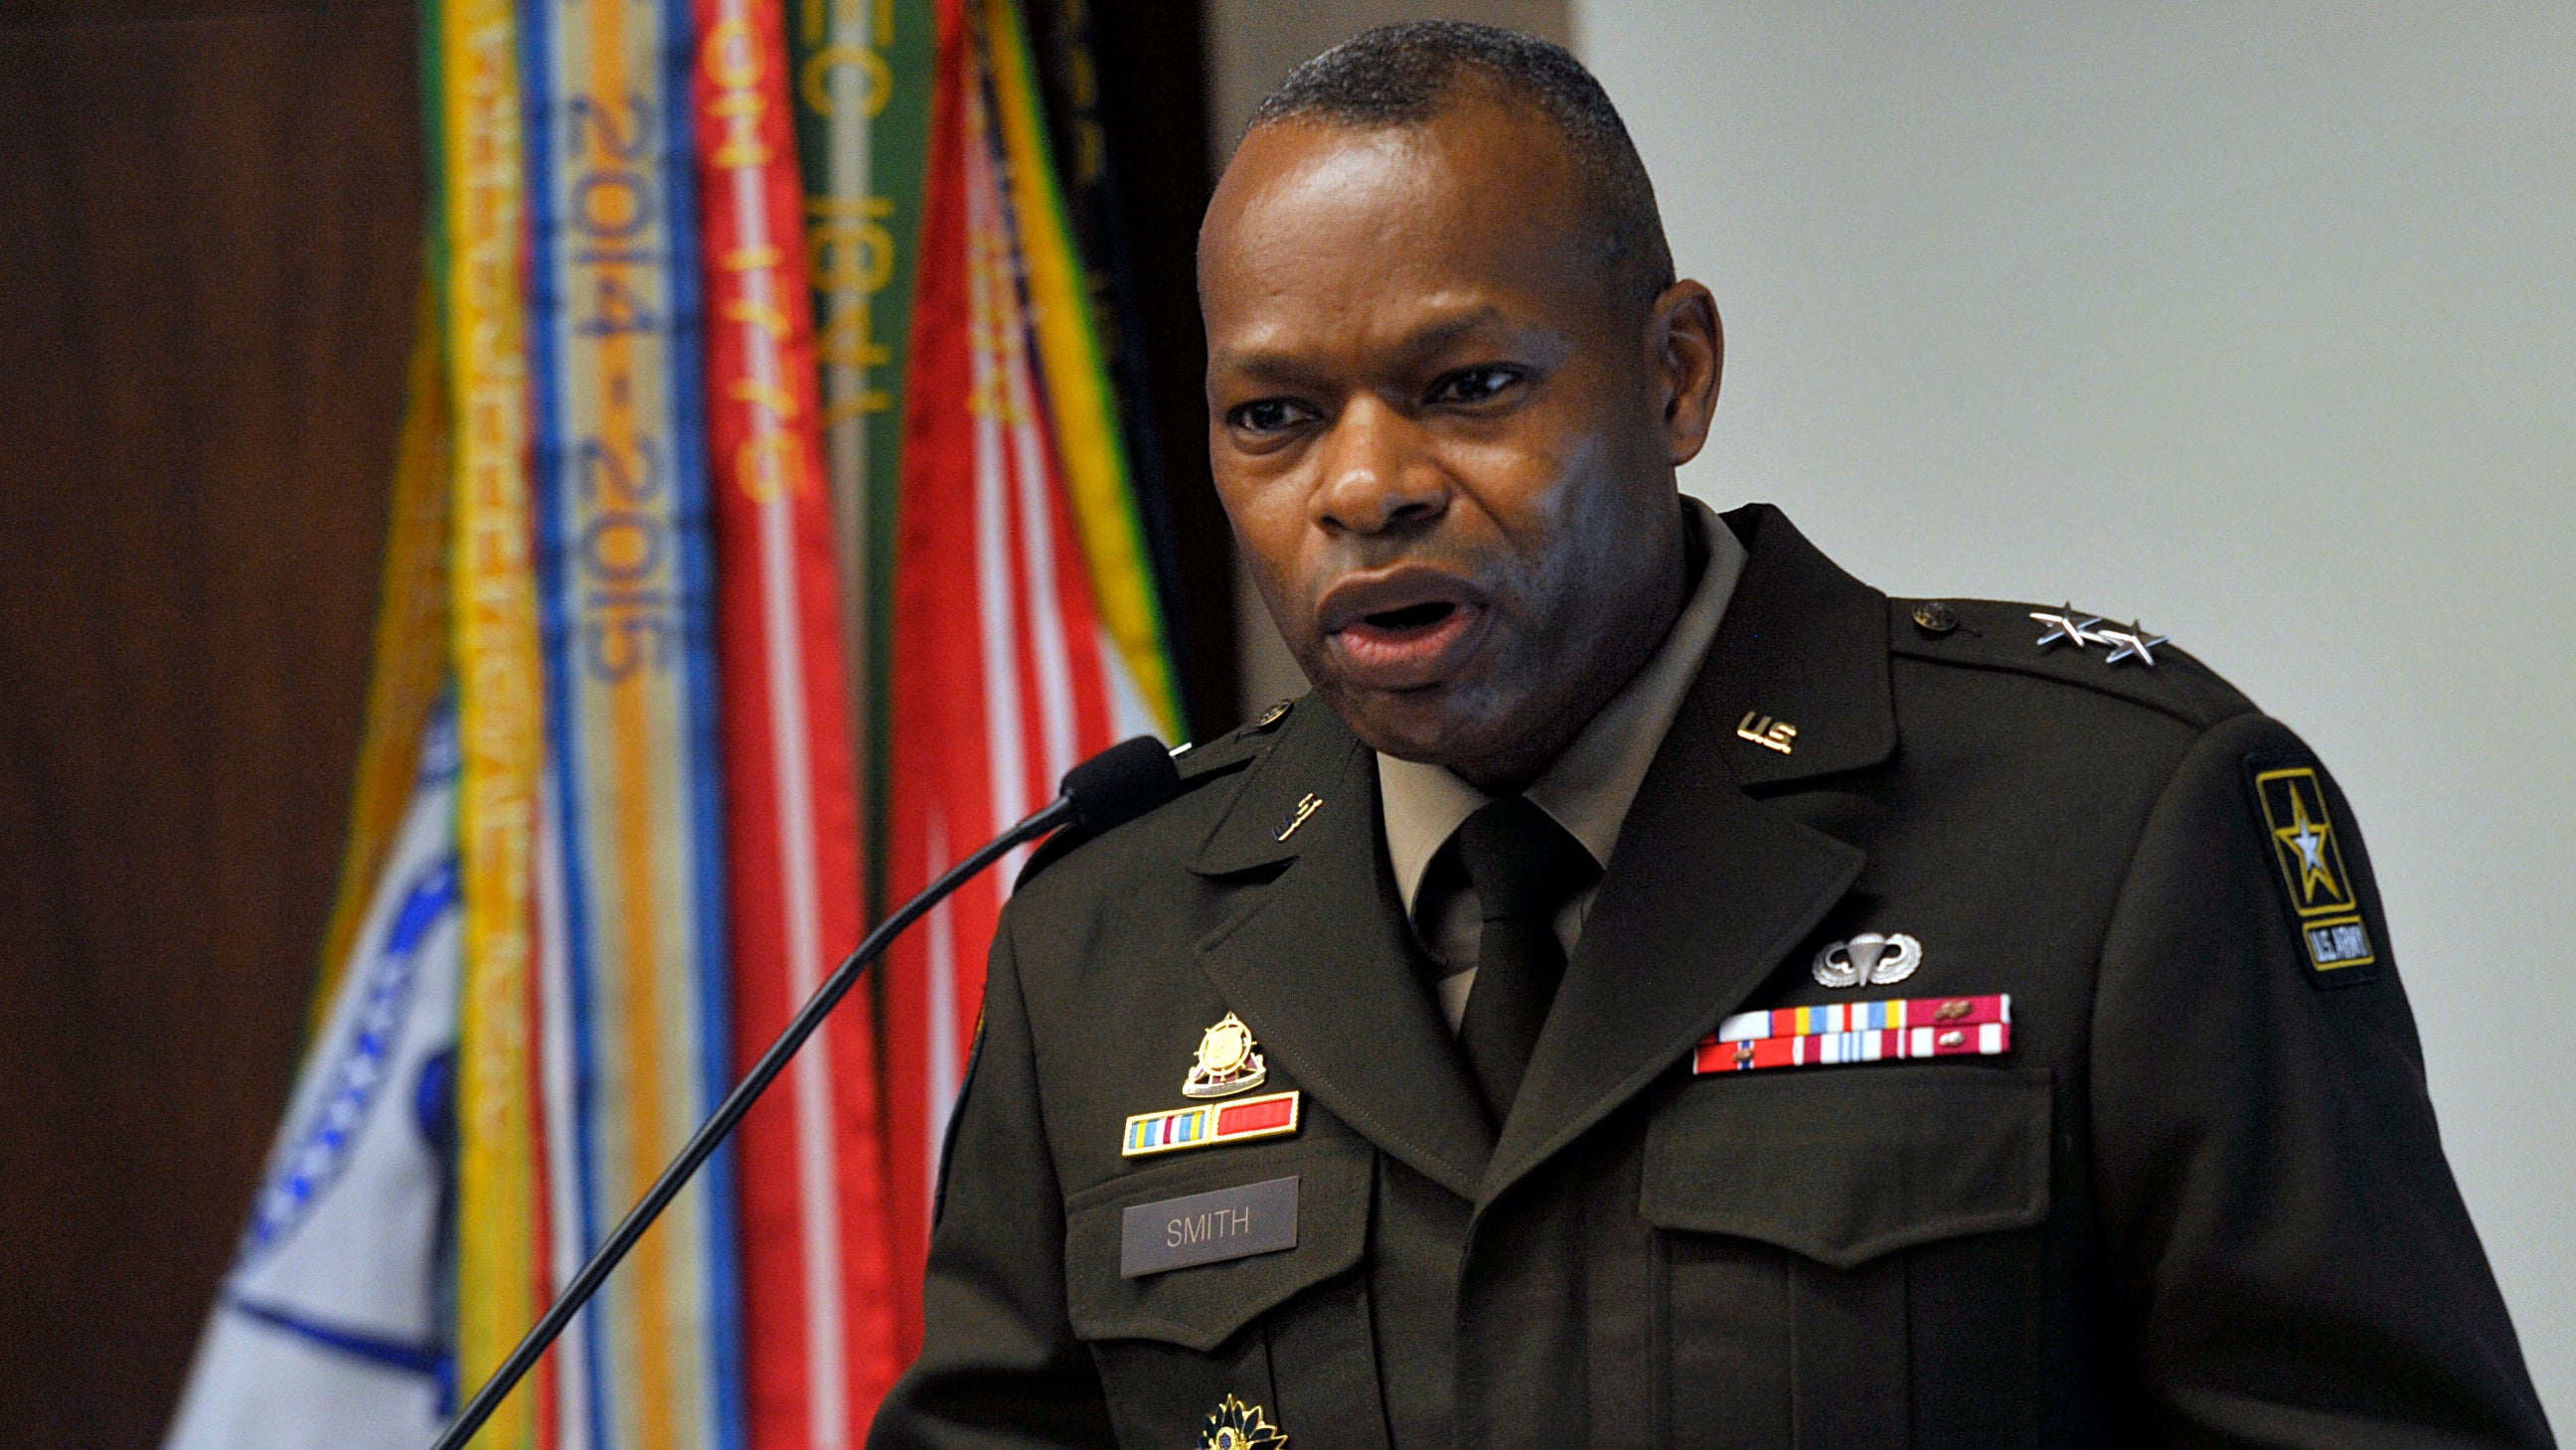 Maj. Gen. James Smith, director of operations for the deputy chief of staff of the Army for logistics, G-4